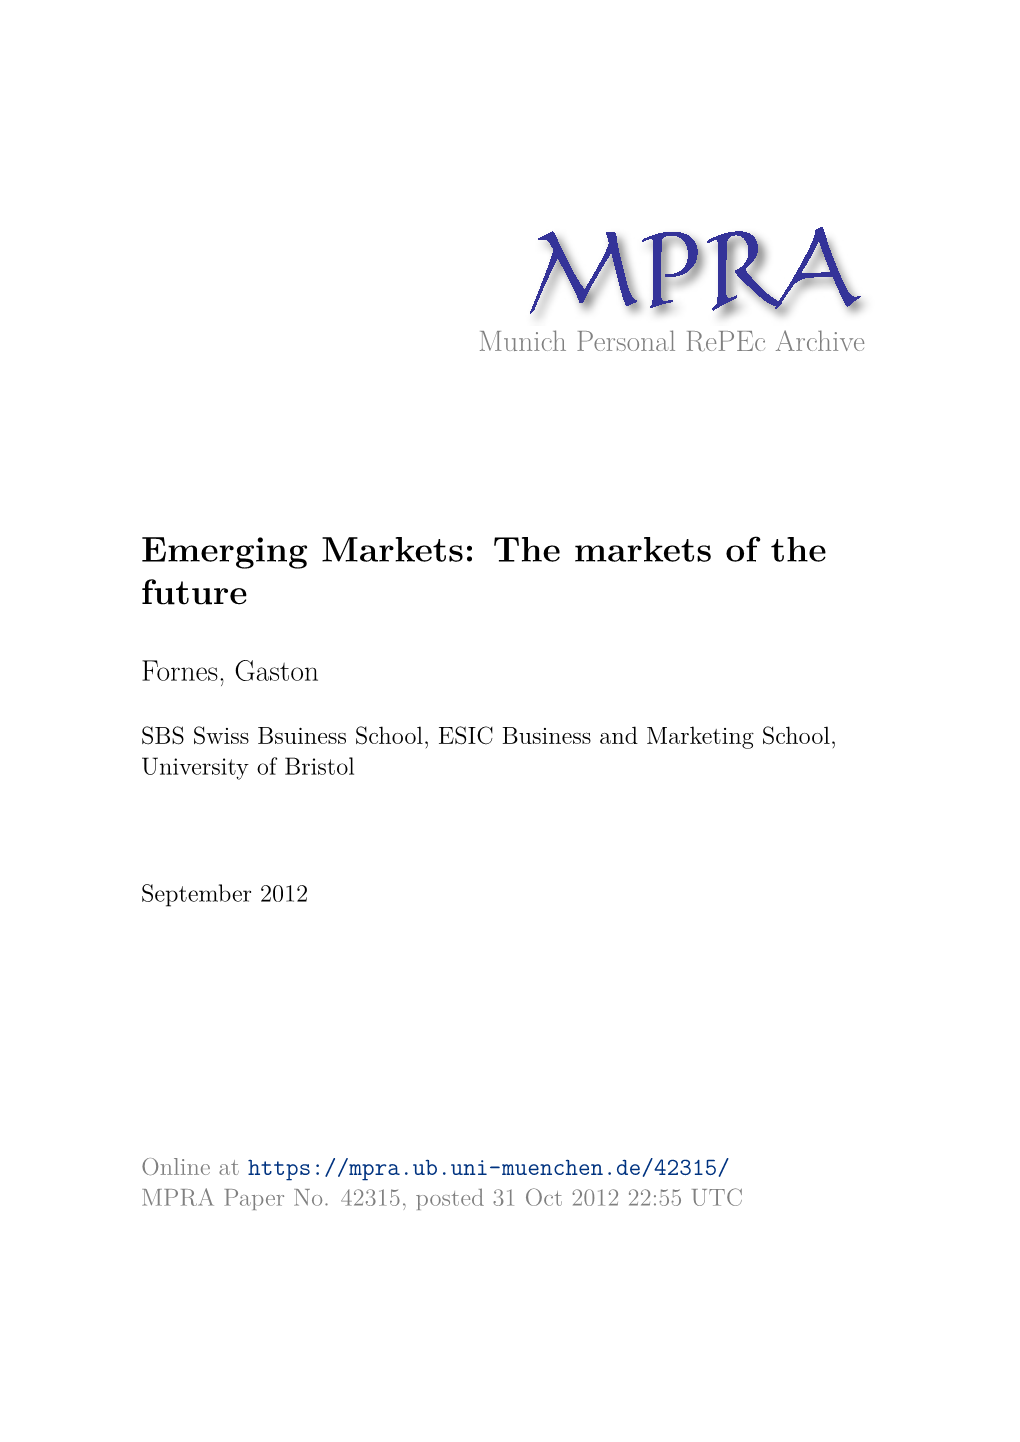 Emerging Markets: the Markets of the Future